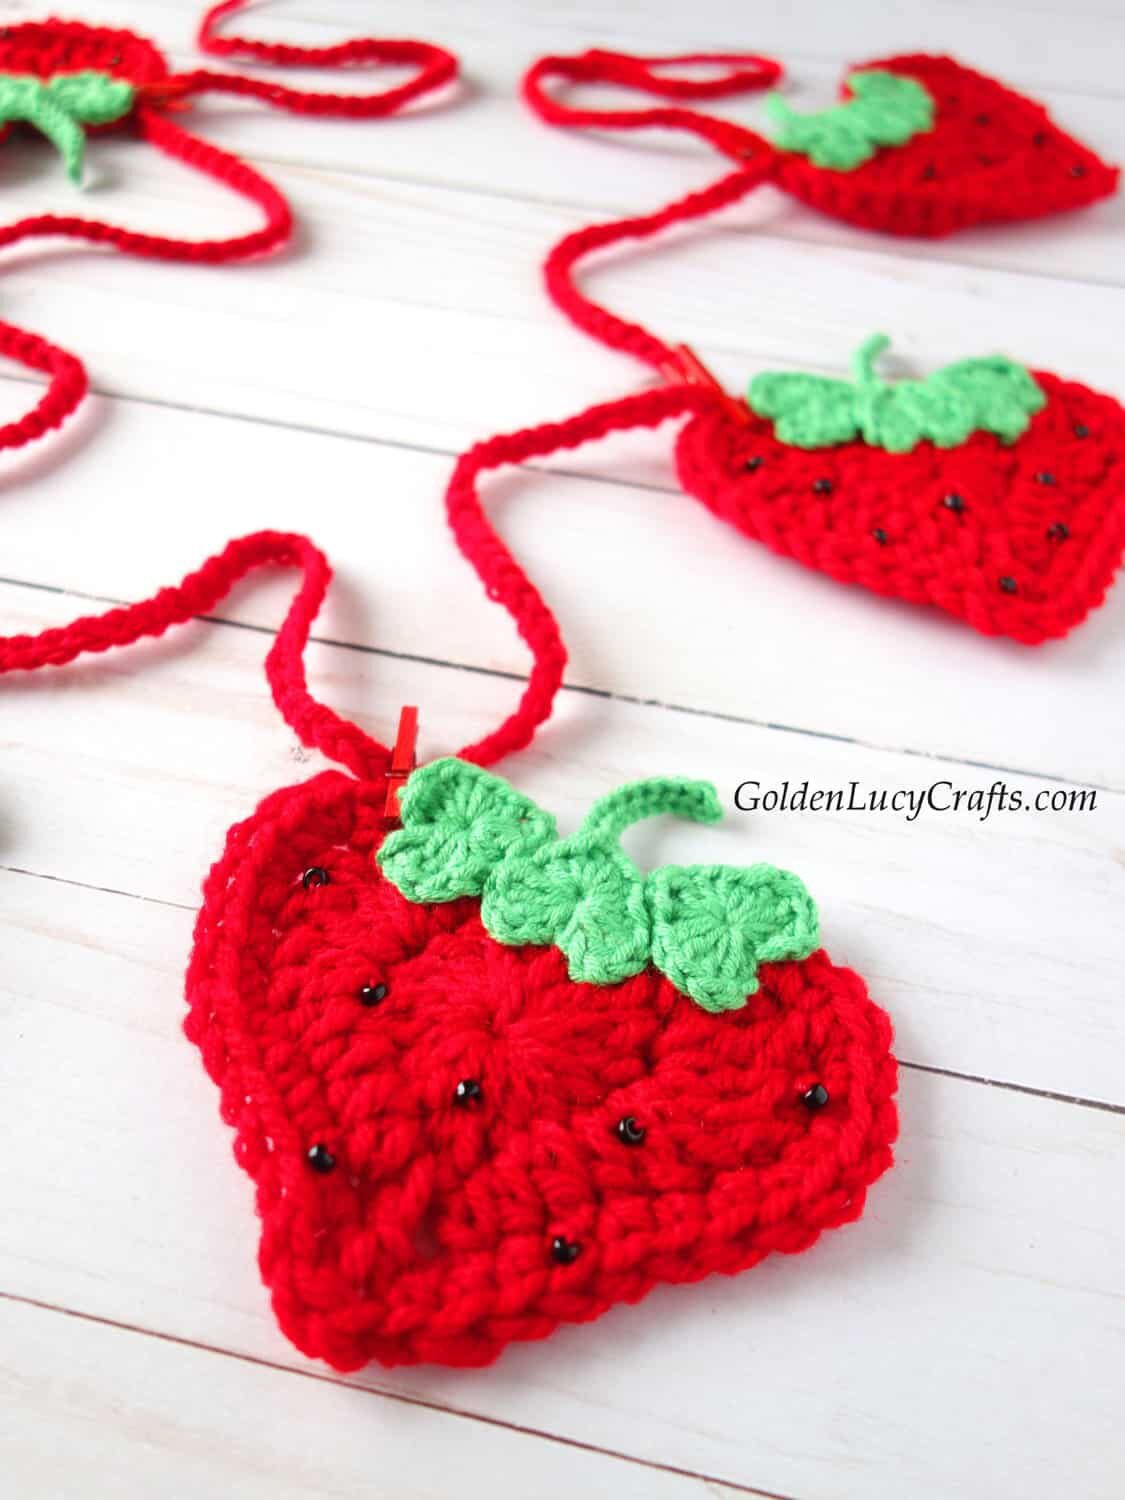 Crochet strawberry garland close up picture.